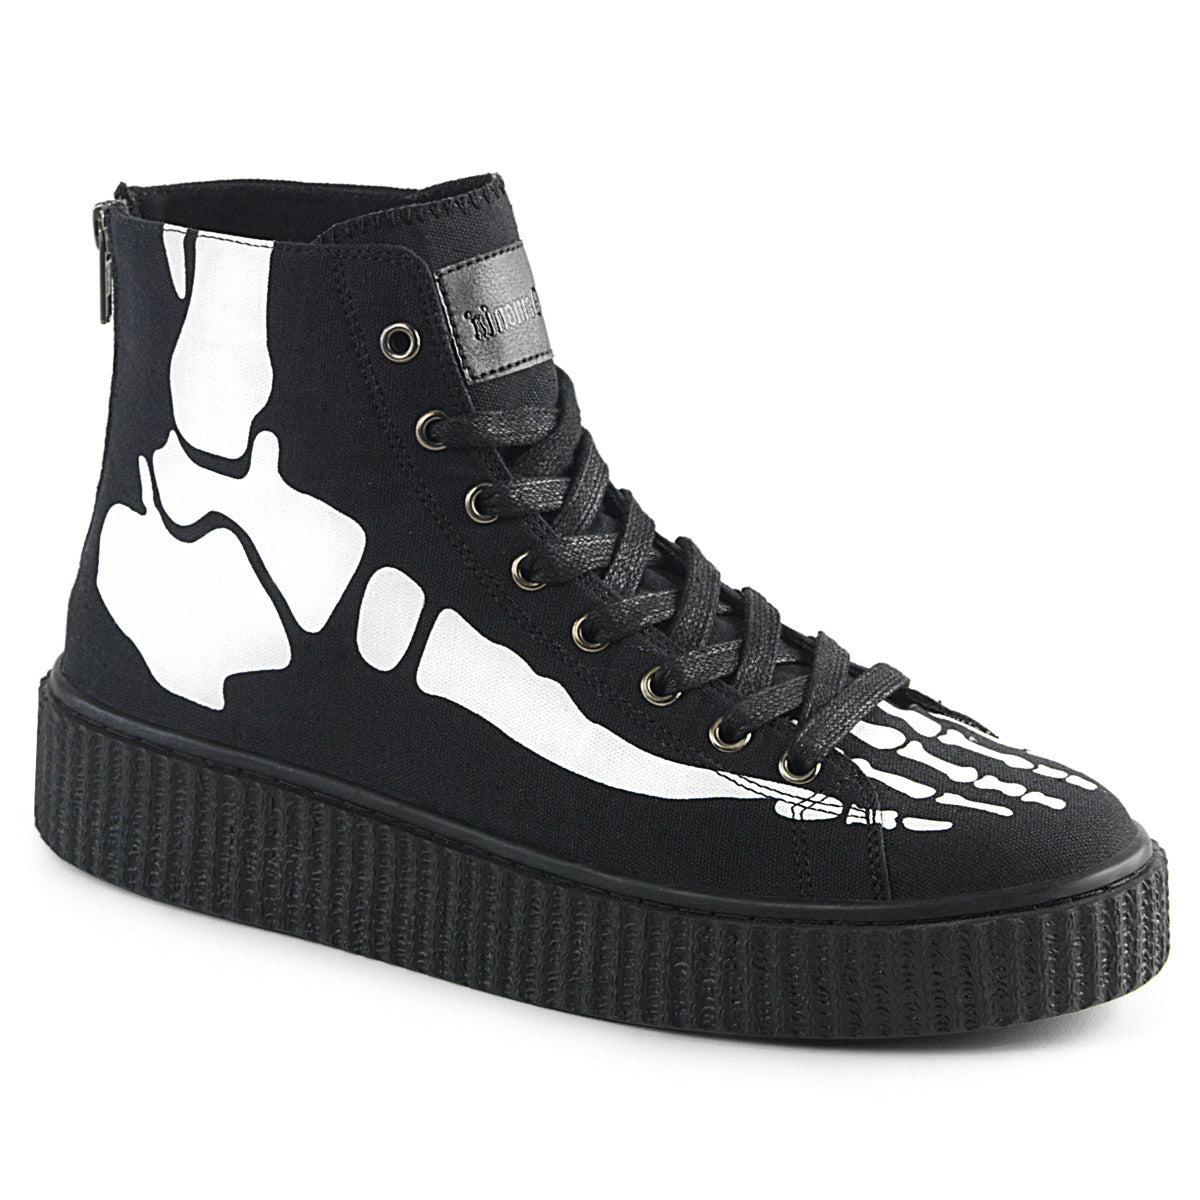 1 1/2"PF Round Toe Lace-Up Front High Top Creeper Sneaker, Pleaser Demonia SNEEKER/252